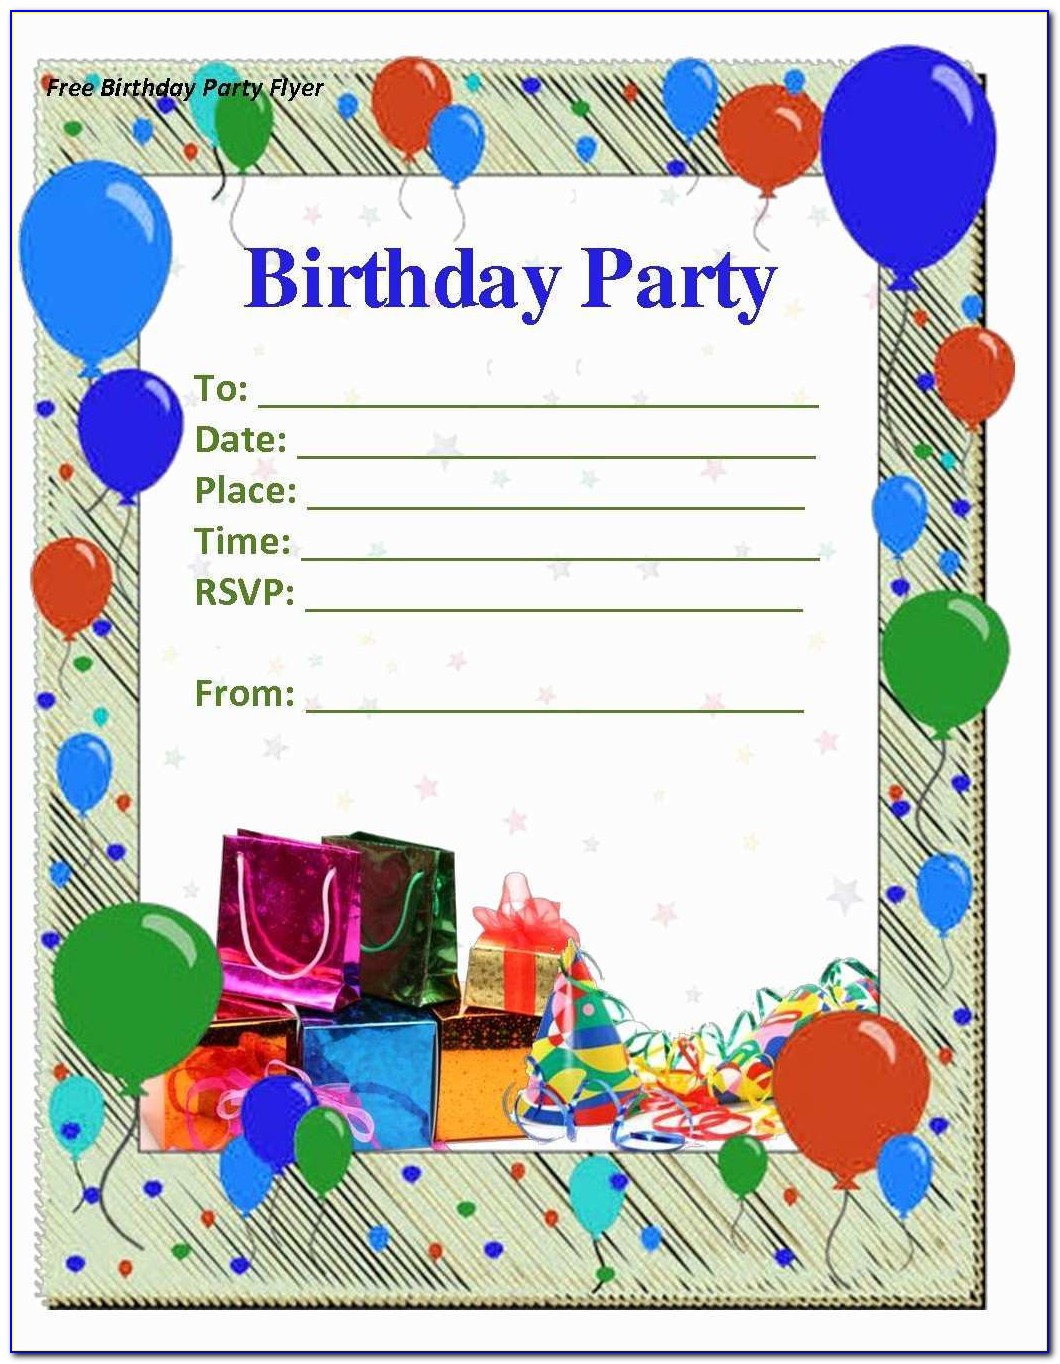 Birthday Invitation Card Template Free Download Vector